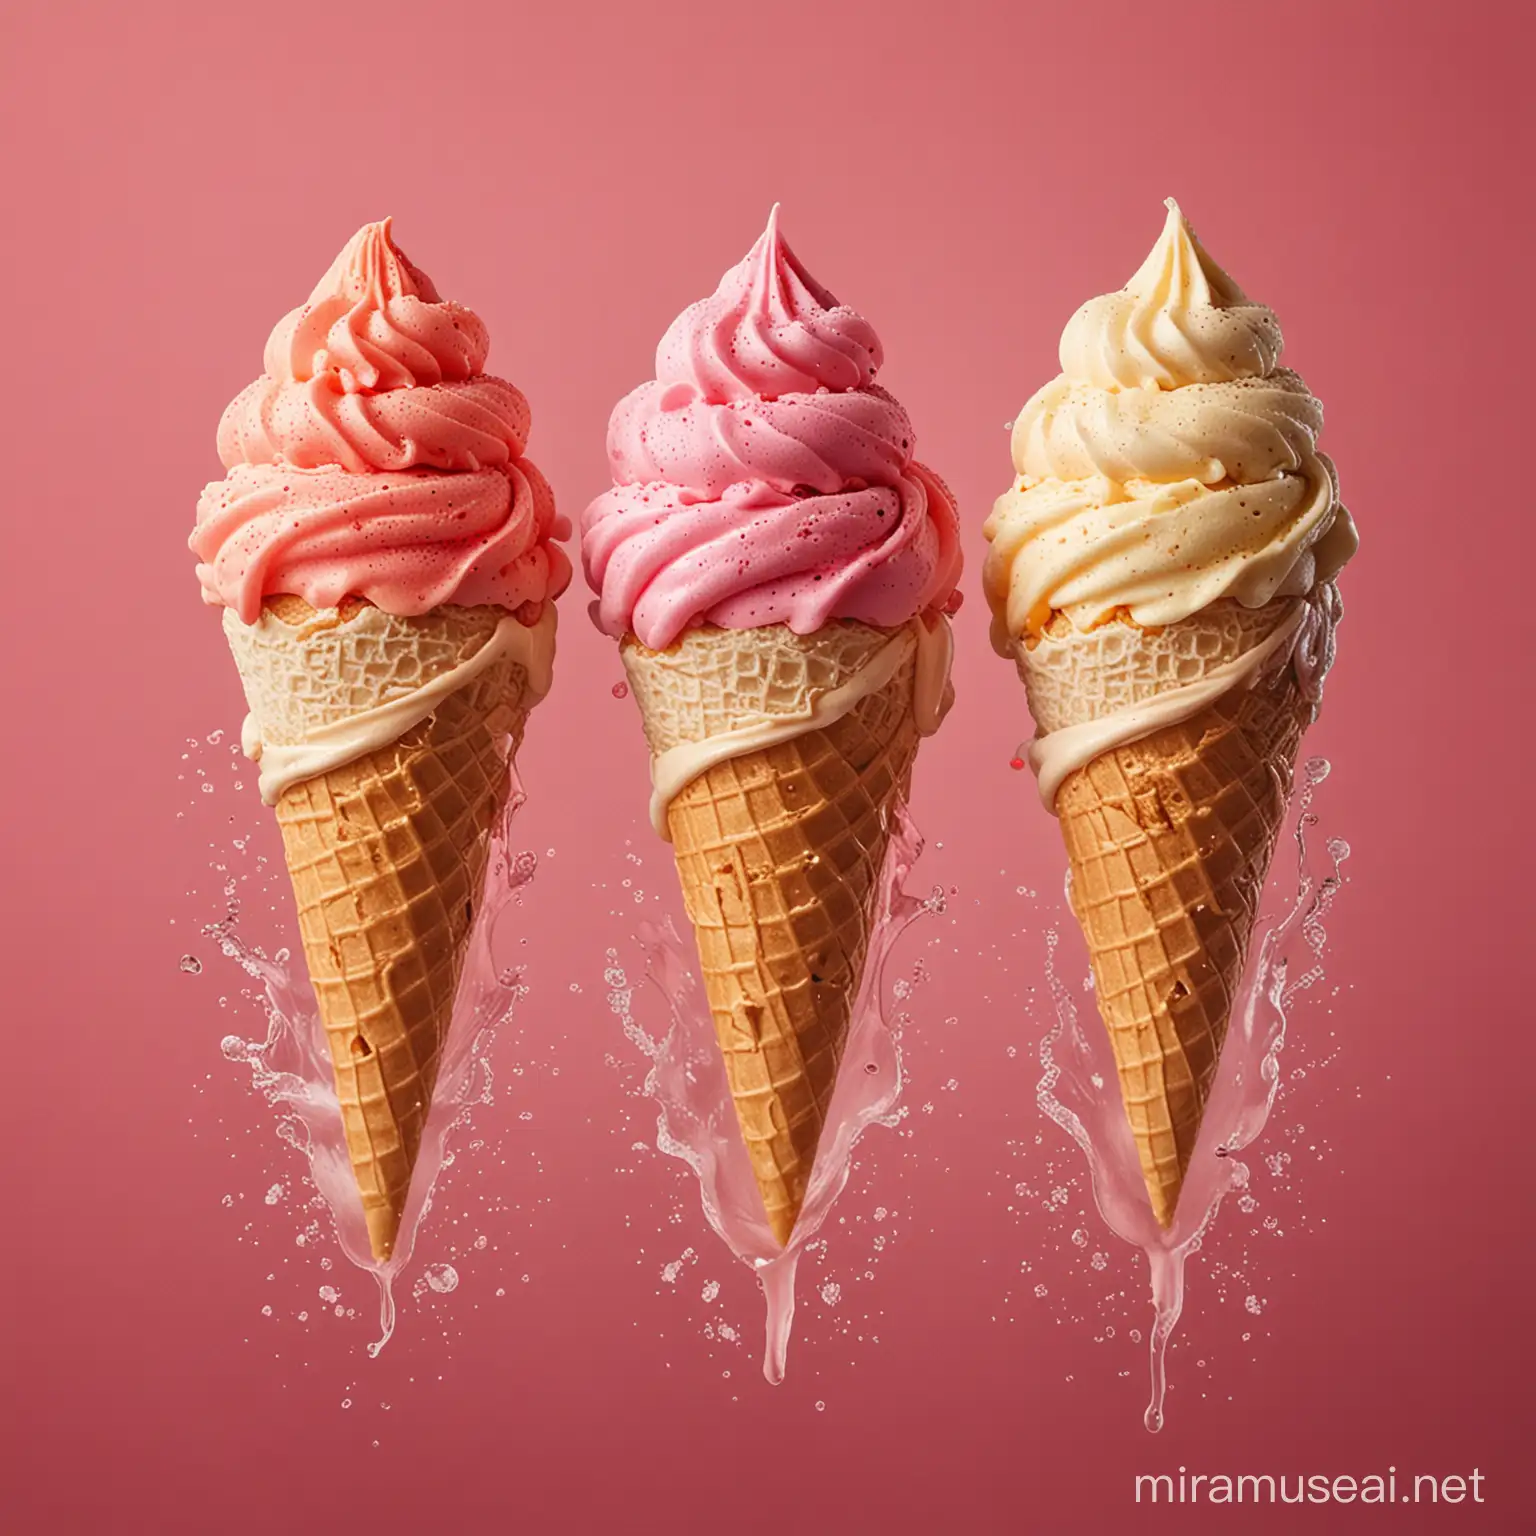 Studio picture of 4 twisted ice creams. One ice cream has a pink color, the second a cappuccino color, the third a tangerine color, the fourth an iced raspberry color. Around the ice creams I want there to be a motif of each flavor, for example some splashes. Each icecream has only one color. Each ice cream has the same cone. The picture will serve as a teaser for the new flavours. Red background. Ultra-realistic.